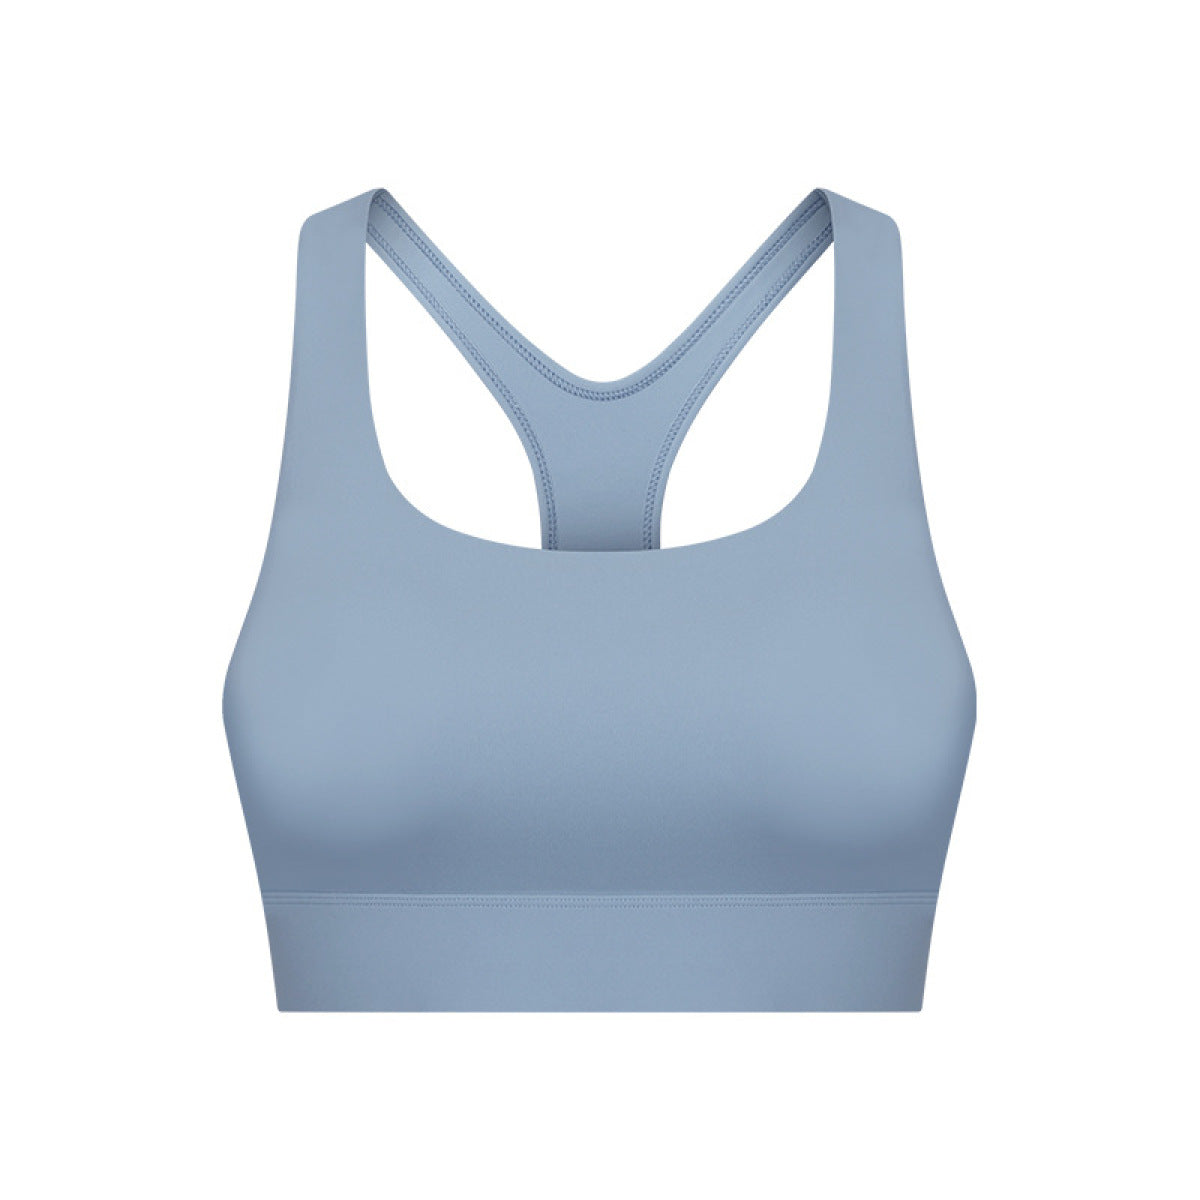 High-Strength Shock-Proof Cut Out Sports Bras With 3-Hook